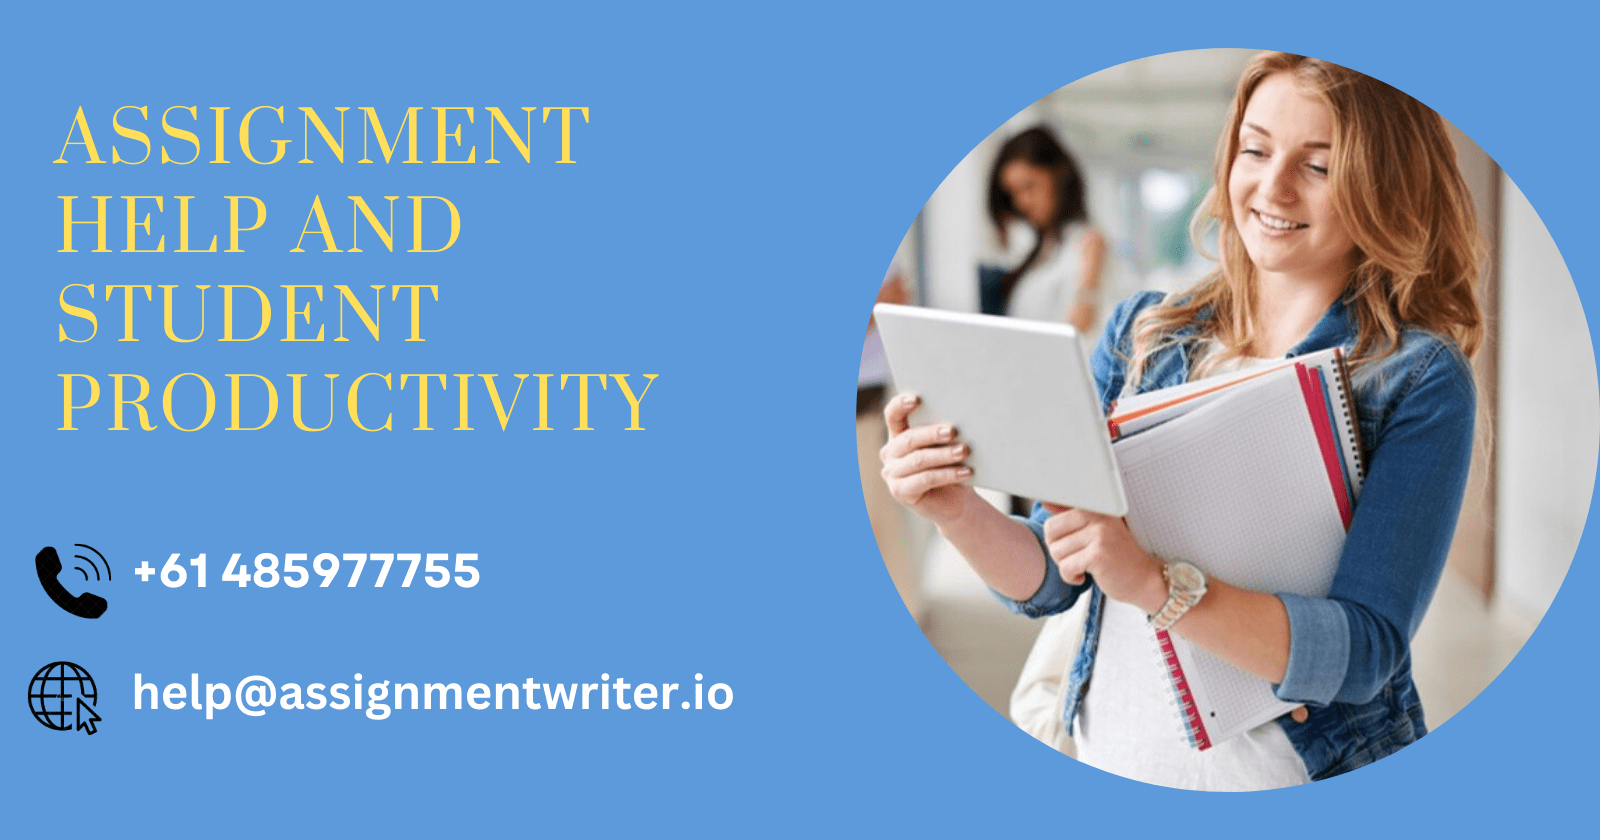 Assignment Help and Student Productivity